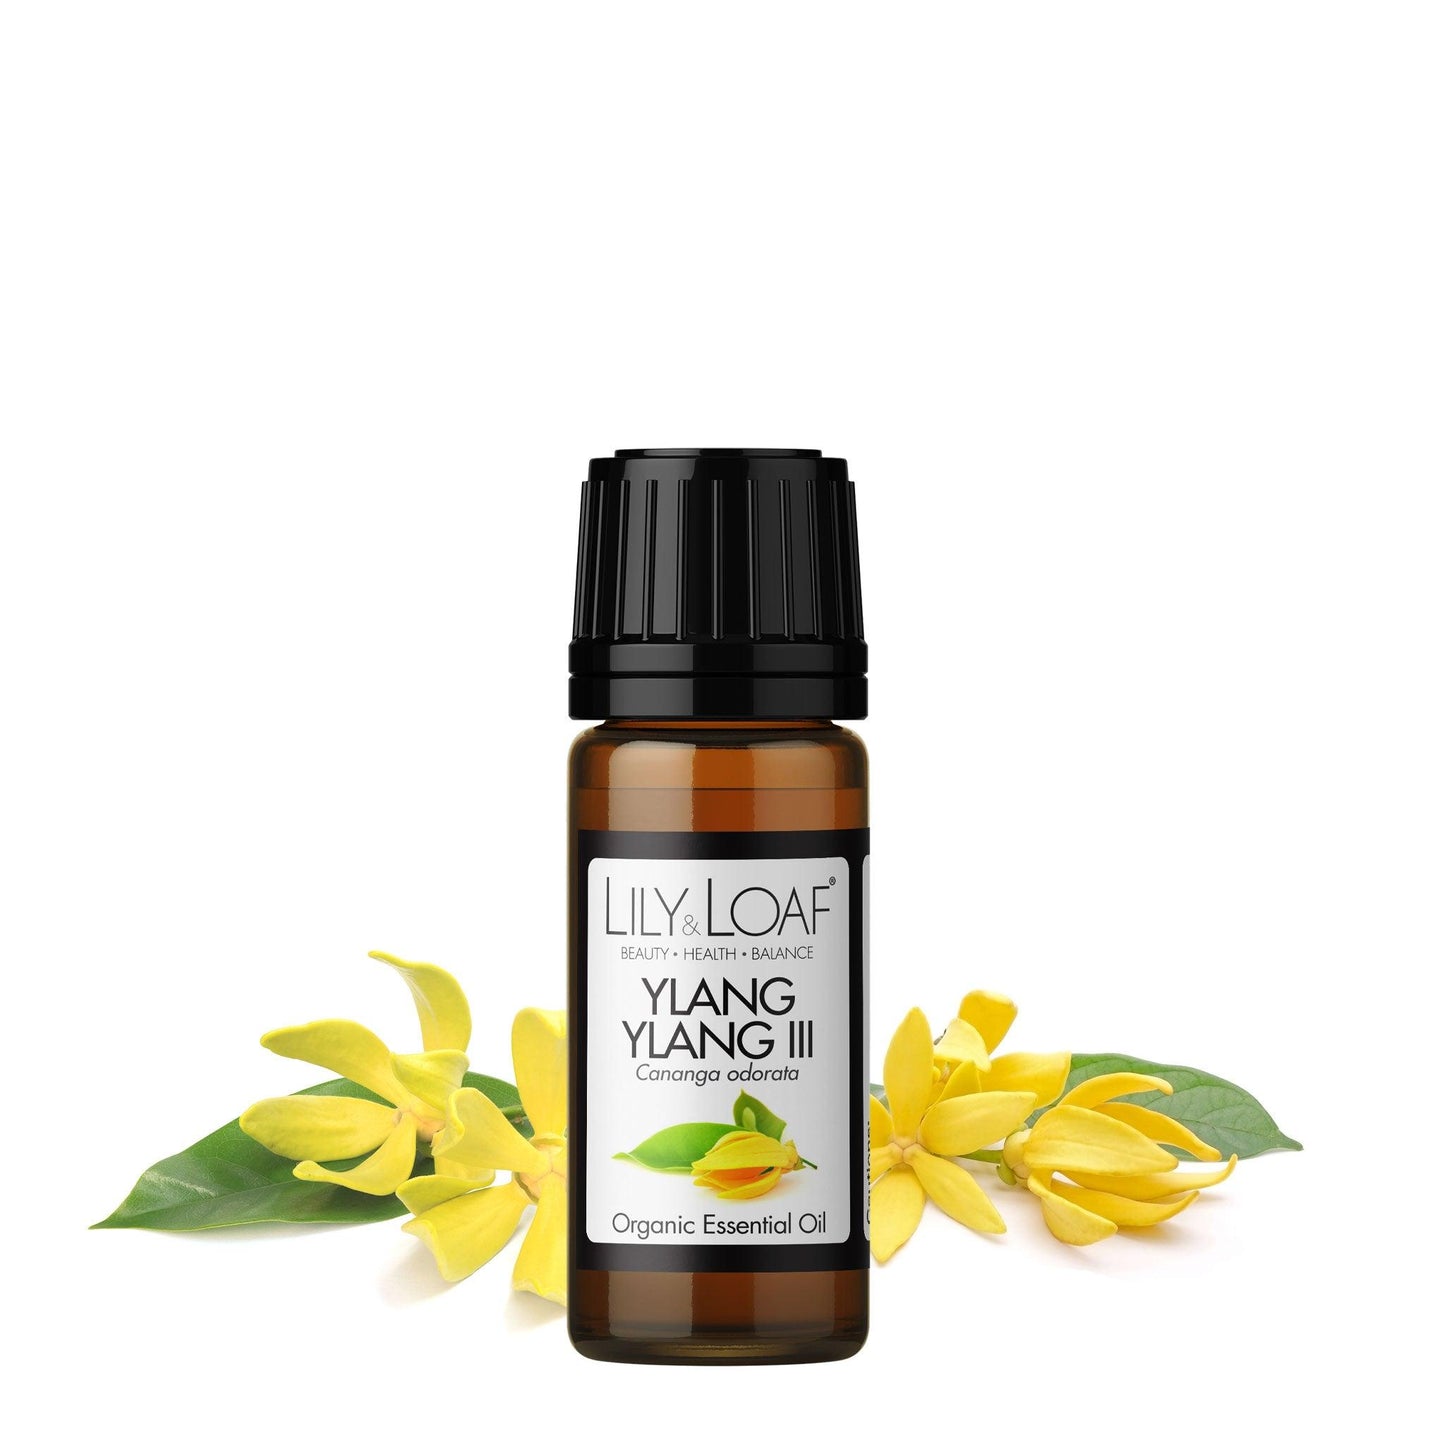 Lily and Loaf - Ylang Ylang III Organic Essential Oil (10ml) - Essential Oil